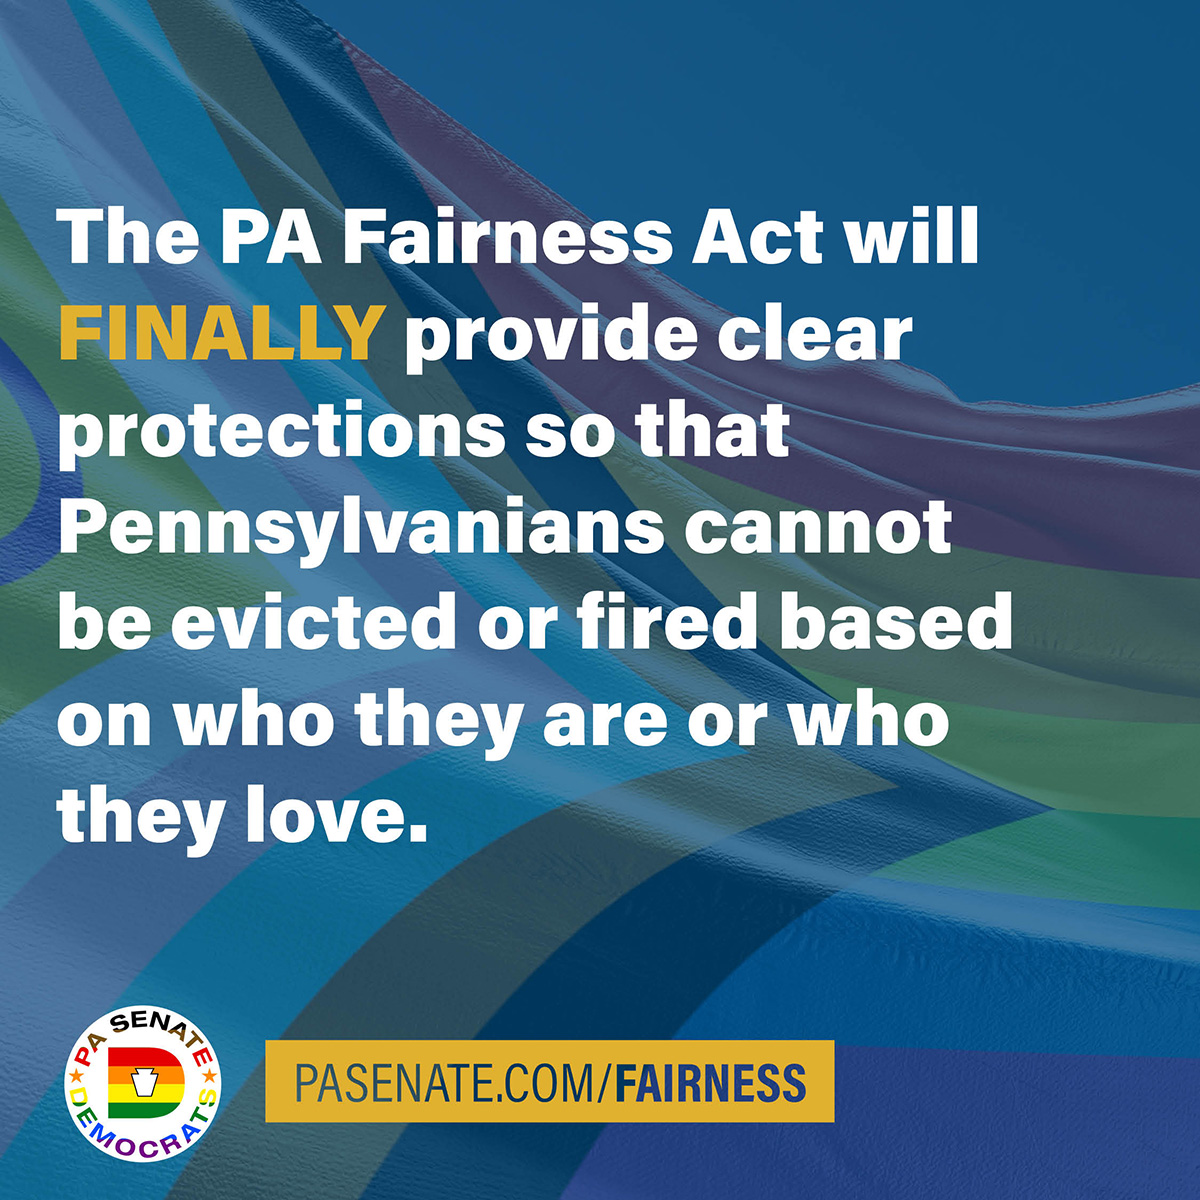 The PA Fairness Act will FINALLY provide clear protections so that Pennsylvanians cannot be evicted or fired based on who they are or who they love.